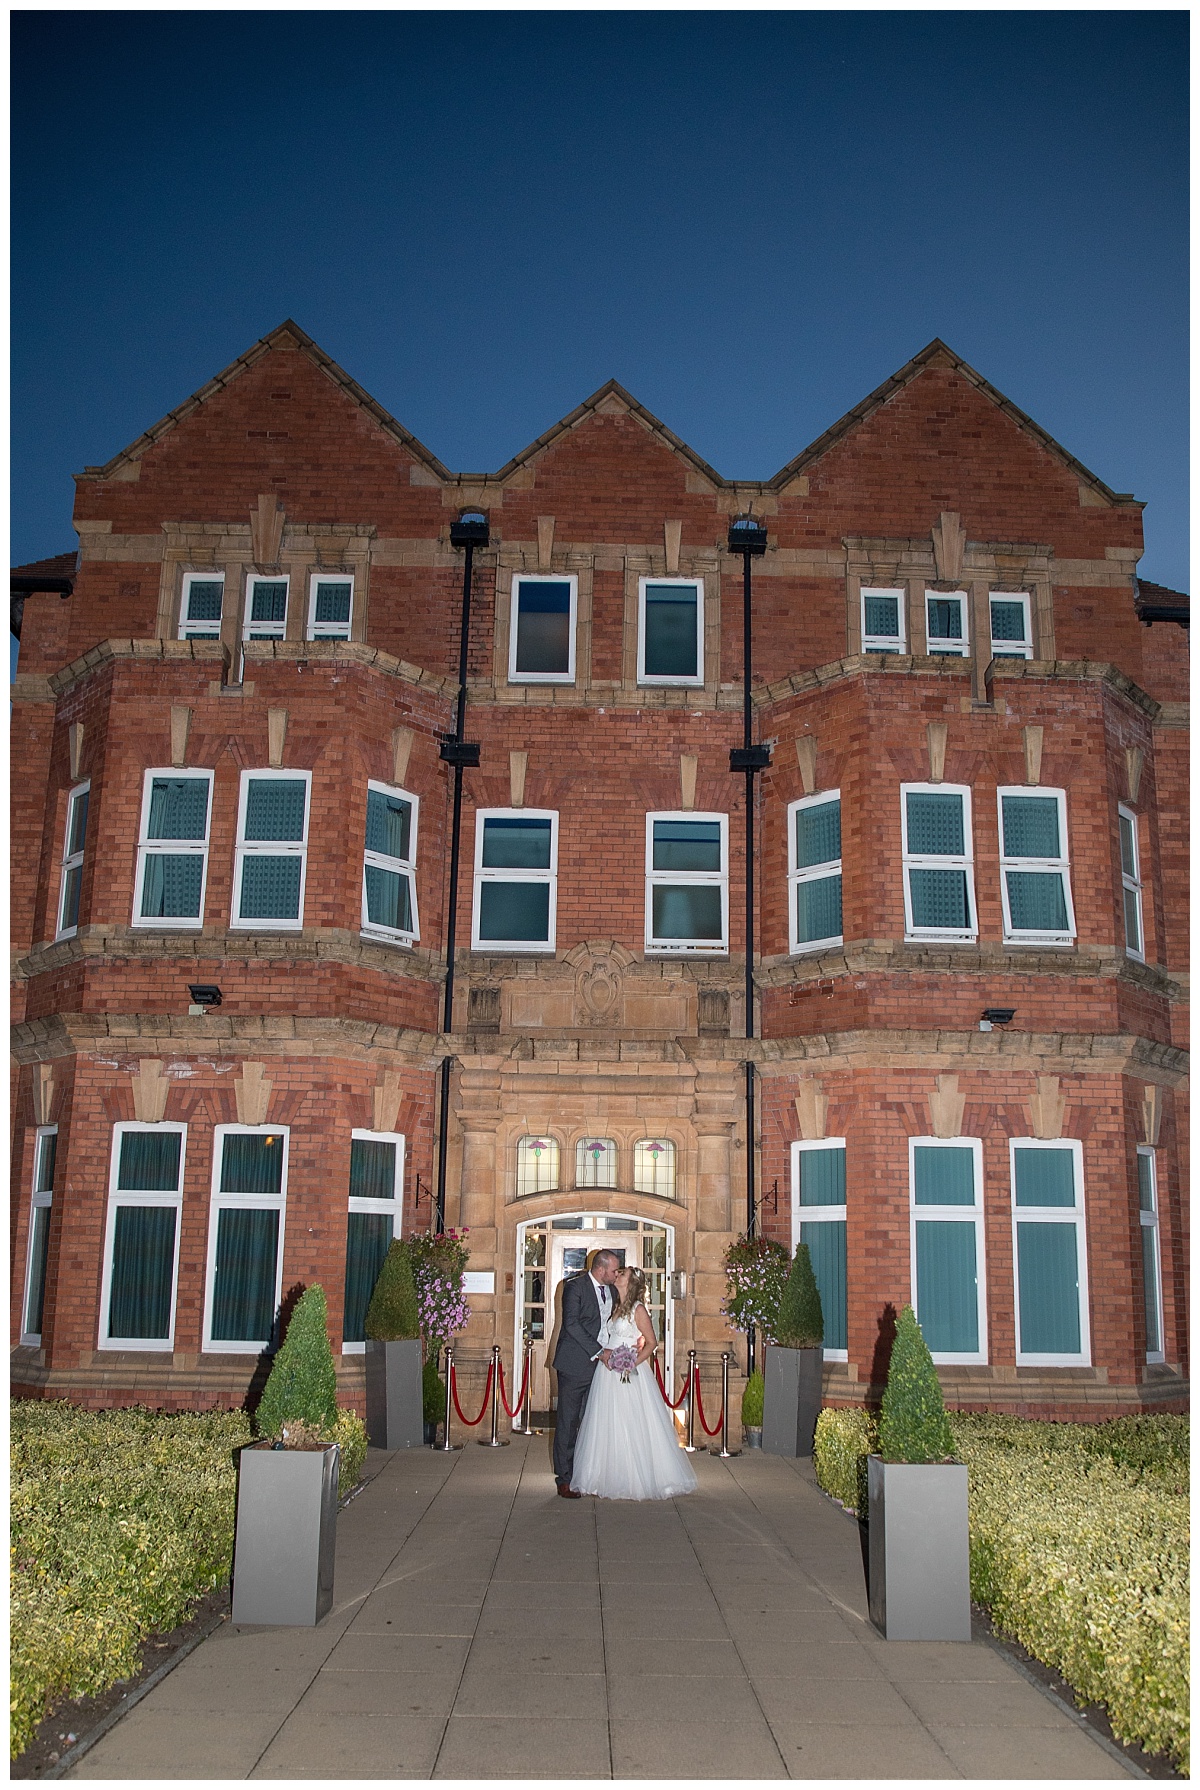 Wedding Photography Manchester - Sam and James's Cheadle House Wedding 89